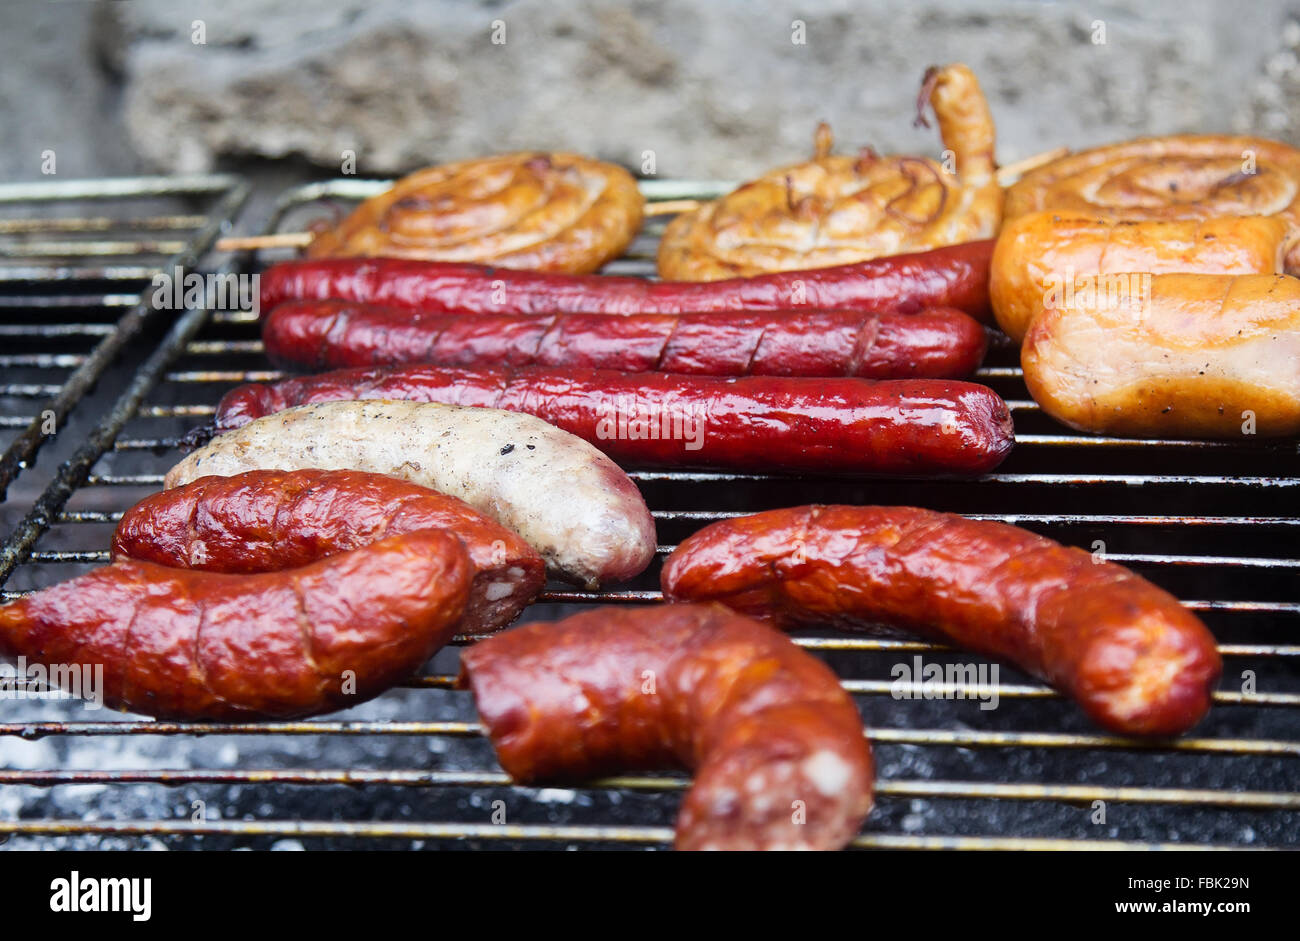 Assortment of grilled sausages and wurst on big grill. Selective focus on the white sausage. Stock Photo